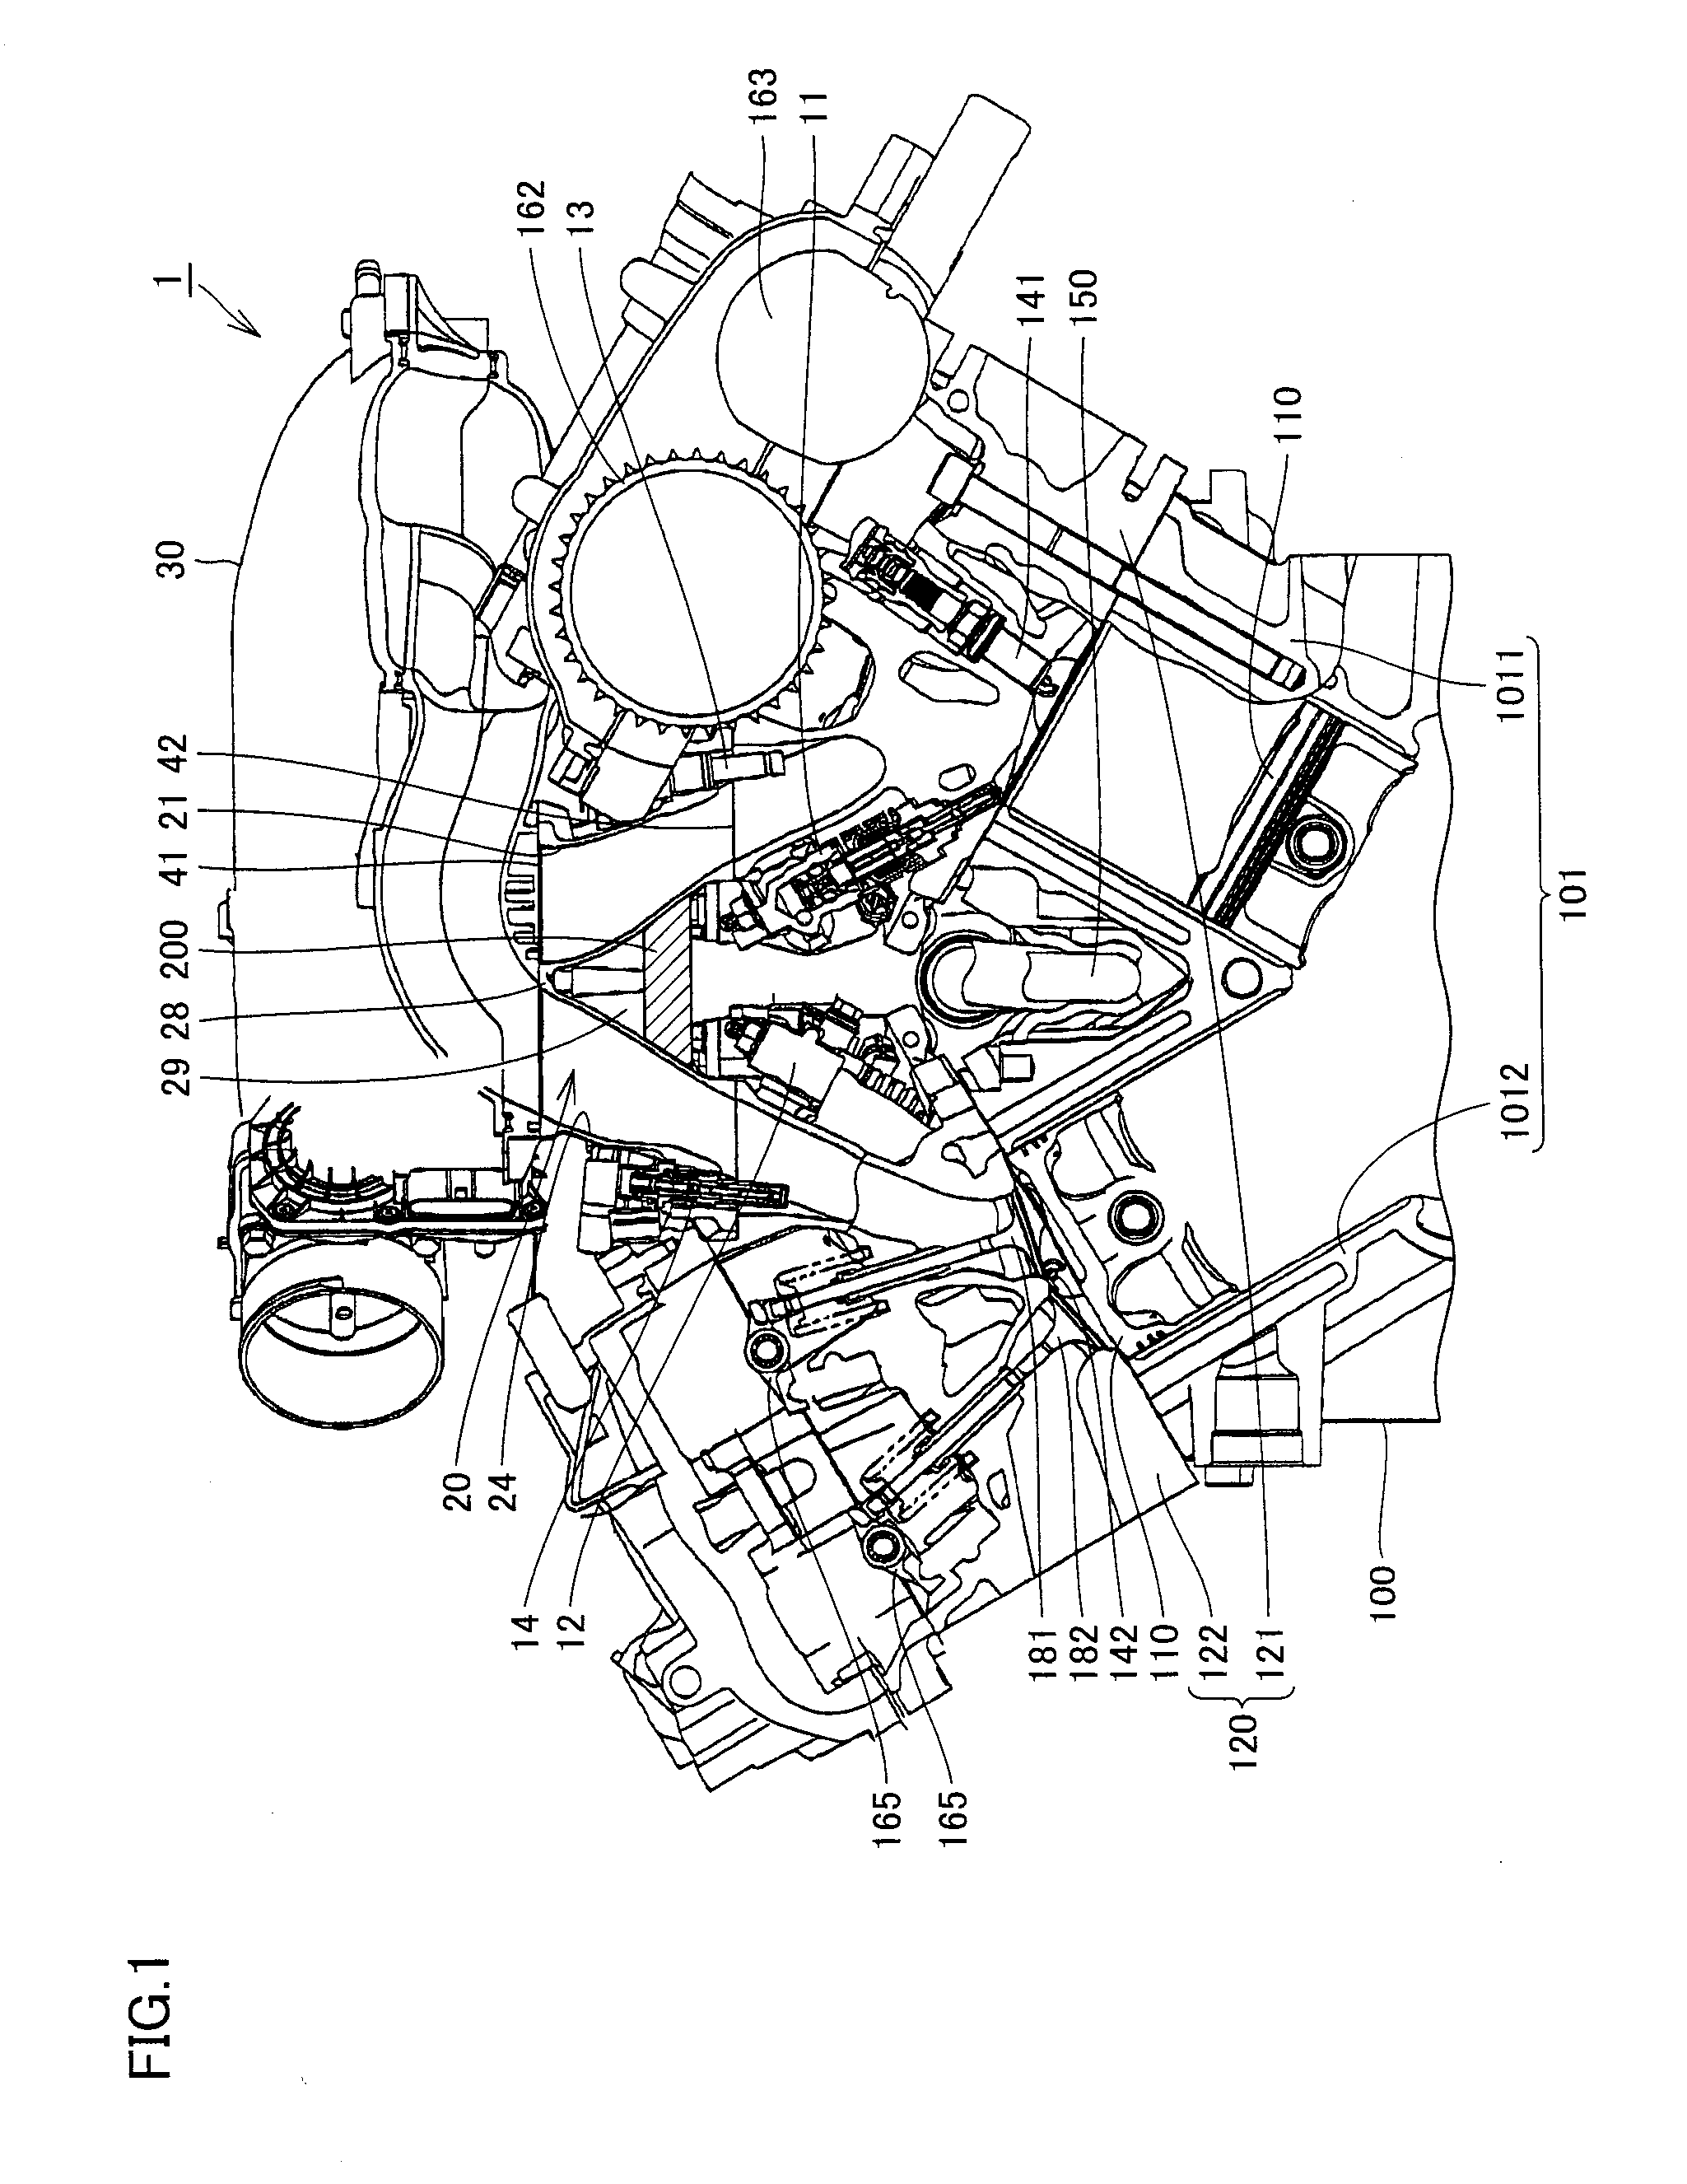 Sound insulation structure of internal combustion engine